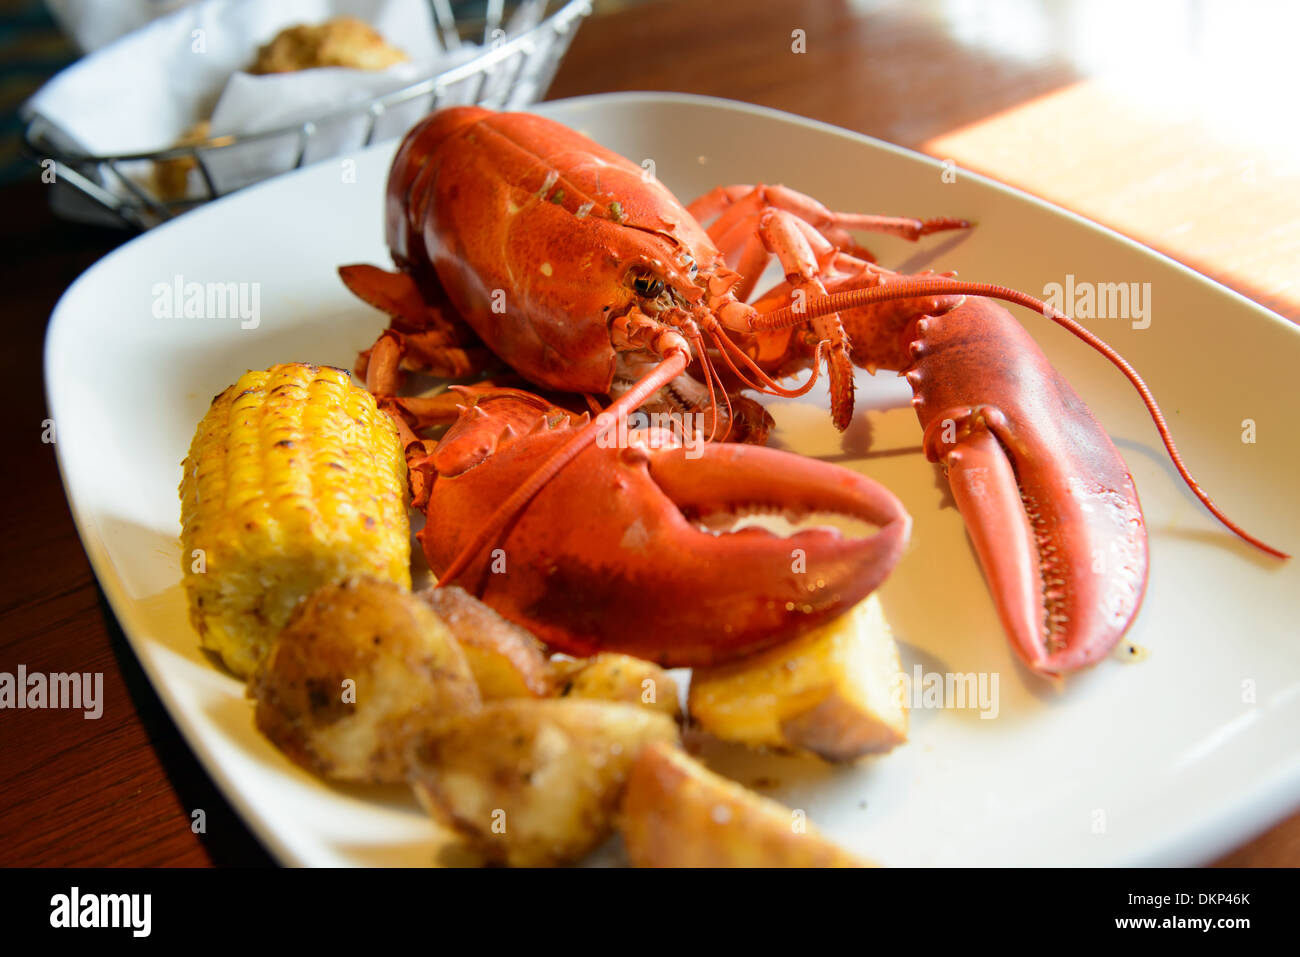 Roasted live marine red lobster served on plate Stock Photo